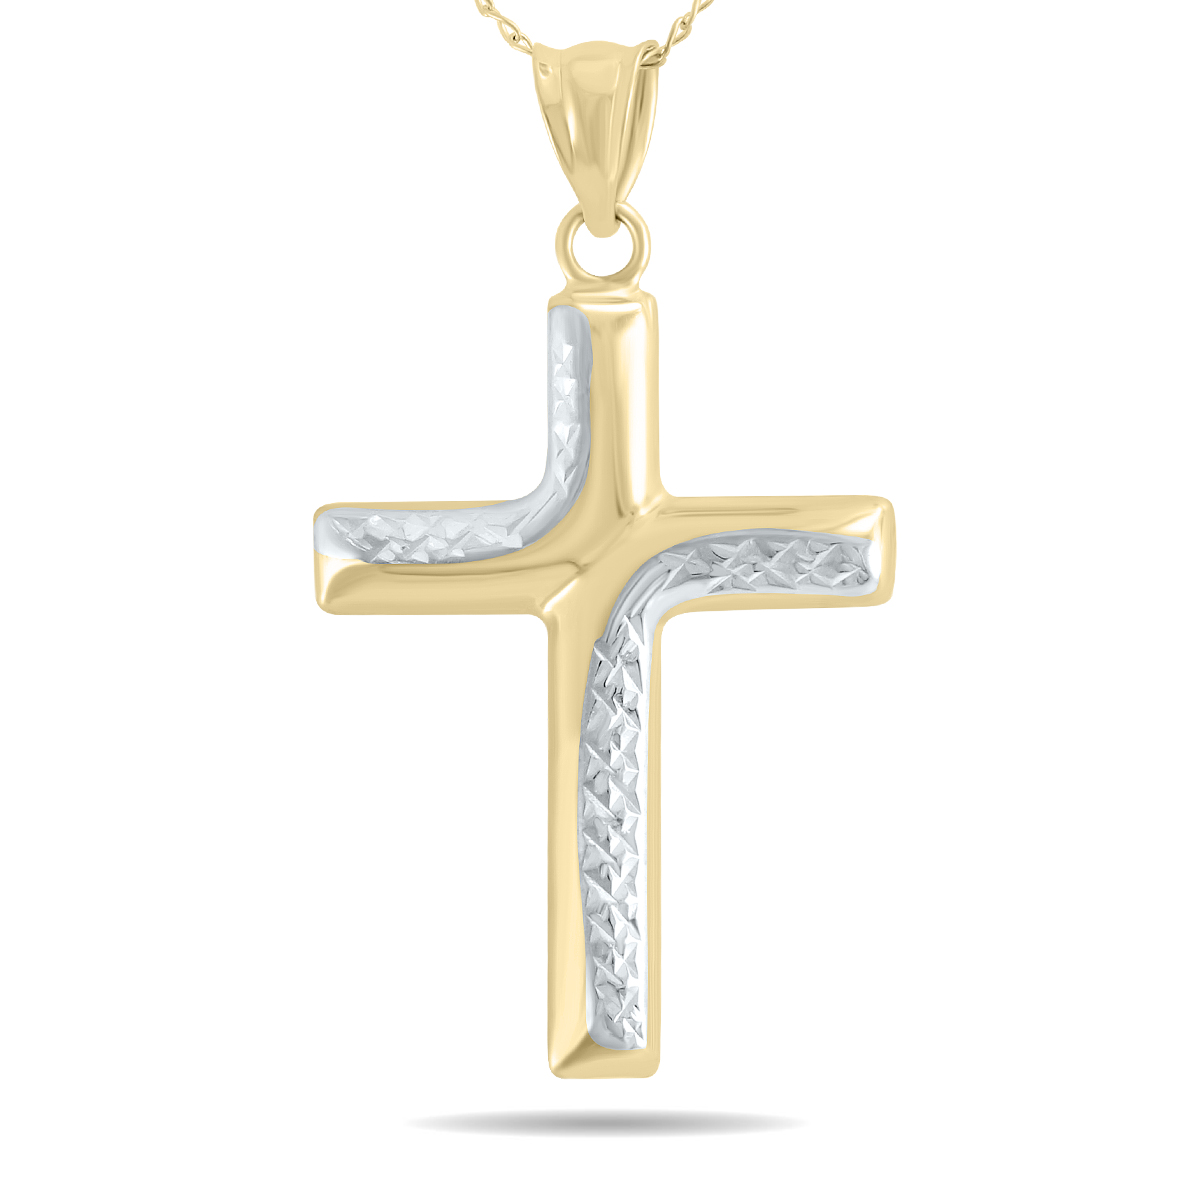 Small Cross Pendant Necklace in 10K Yellow Gold with Rhodium Polish Accents